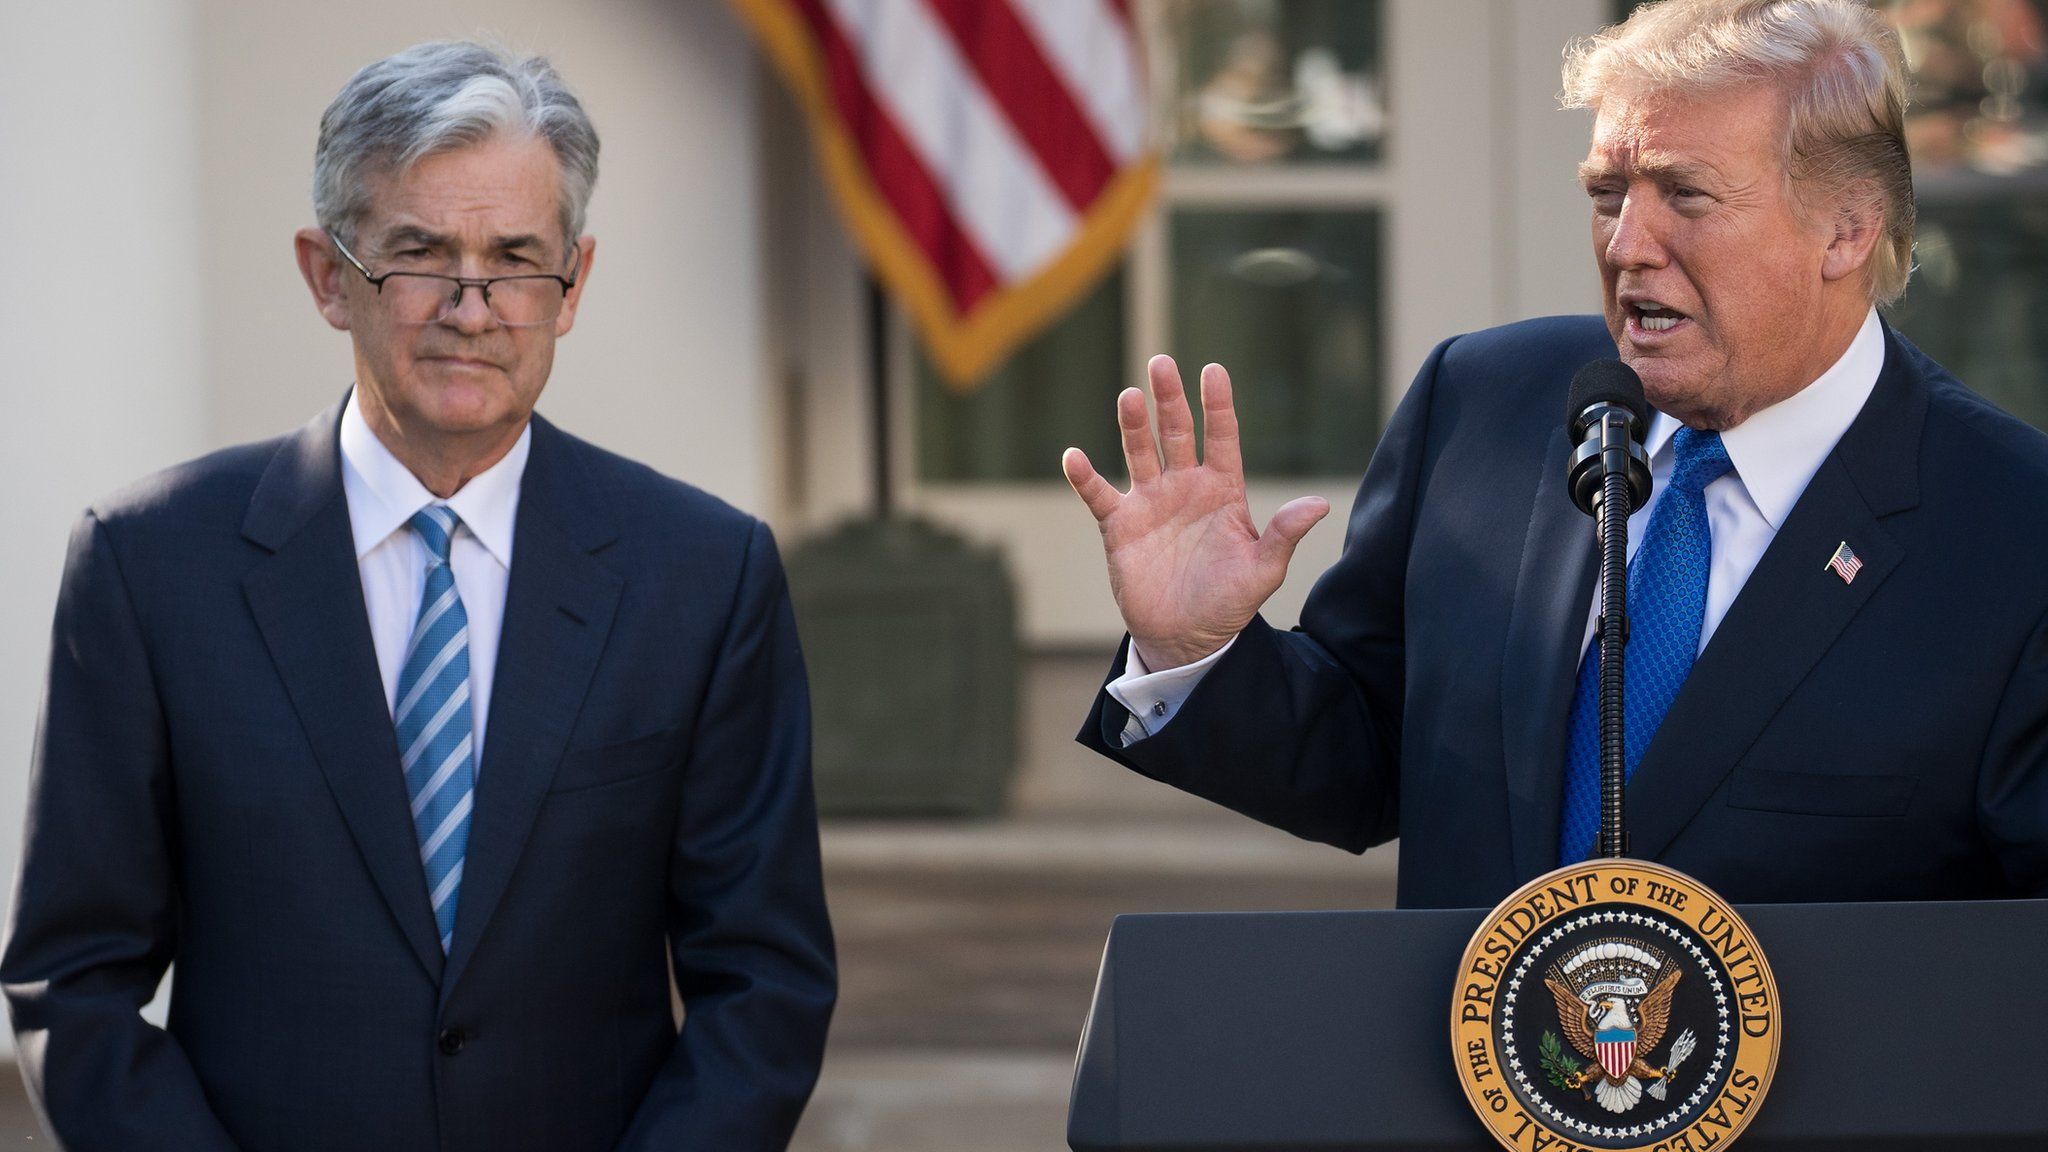 Jerome Powell and Donald Trump